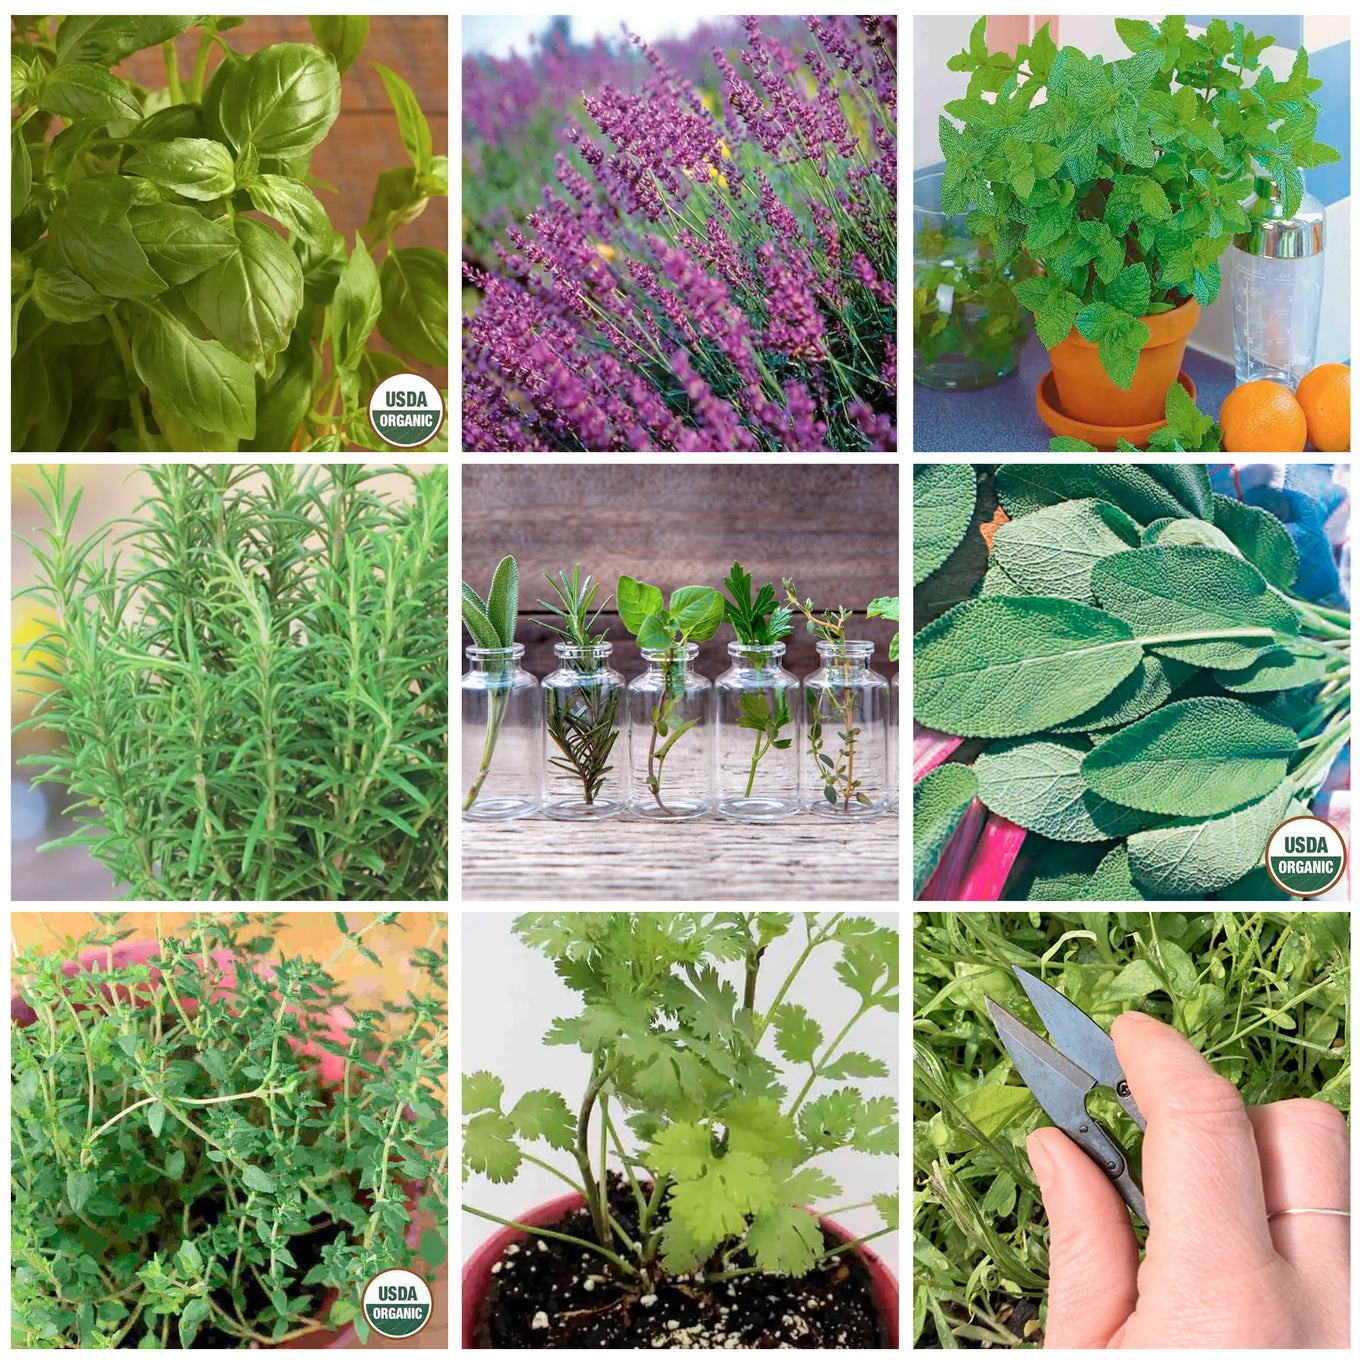 Ferry-Morse grow your own aromatherapy herb garden bundle includes everything you need to start, grow and harvest your herbs!